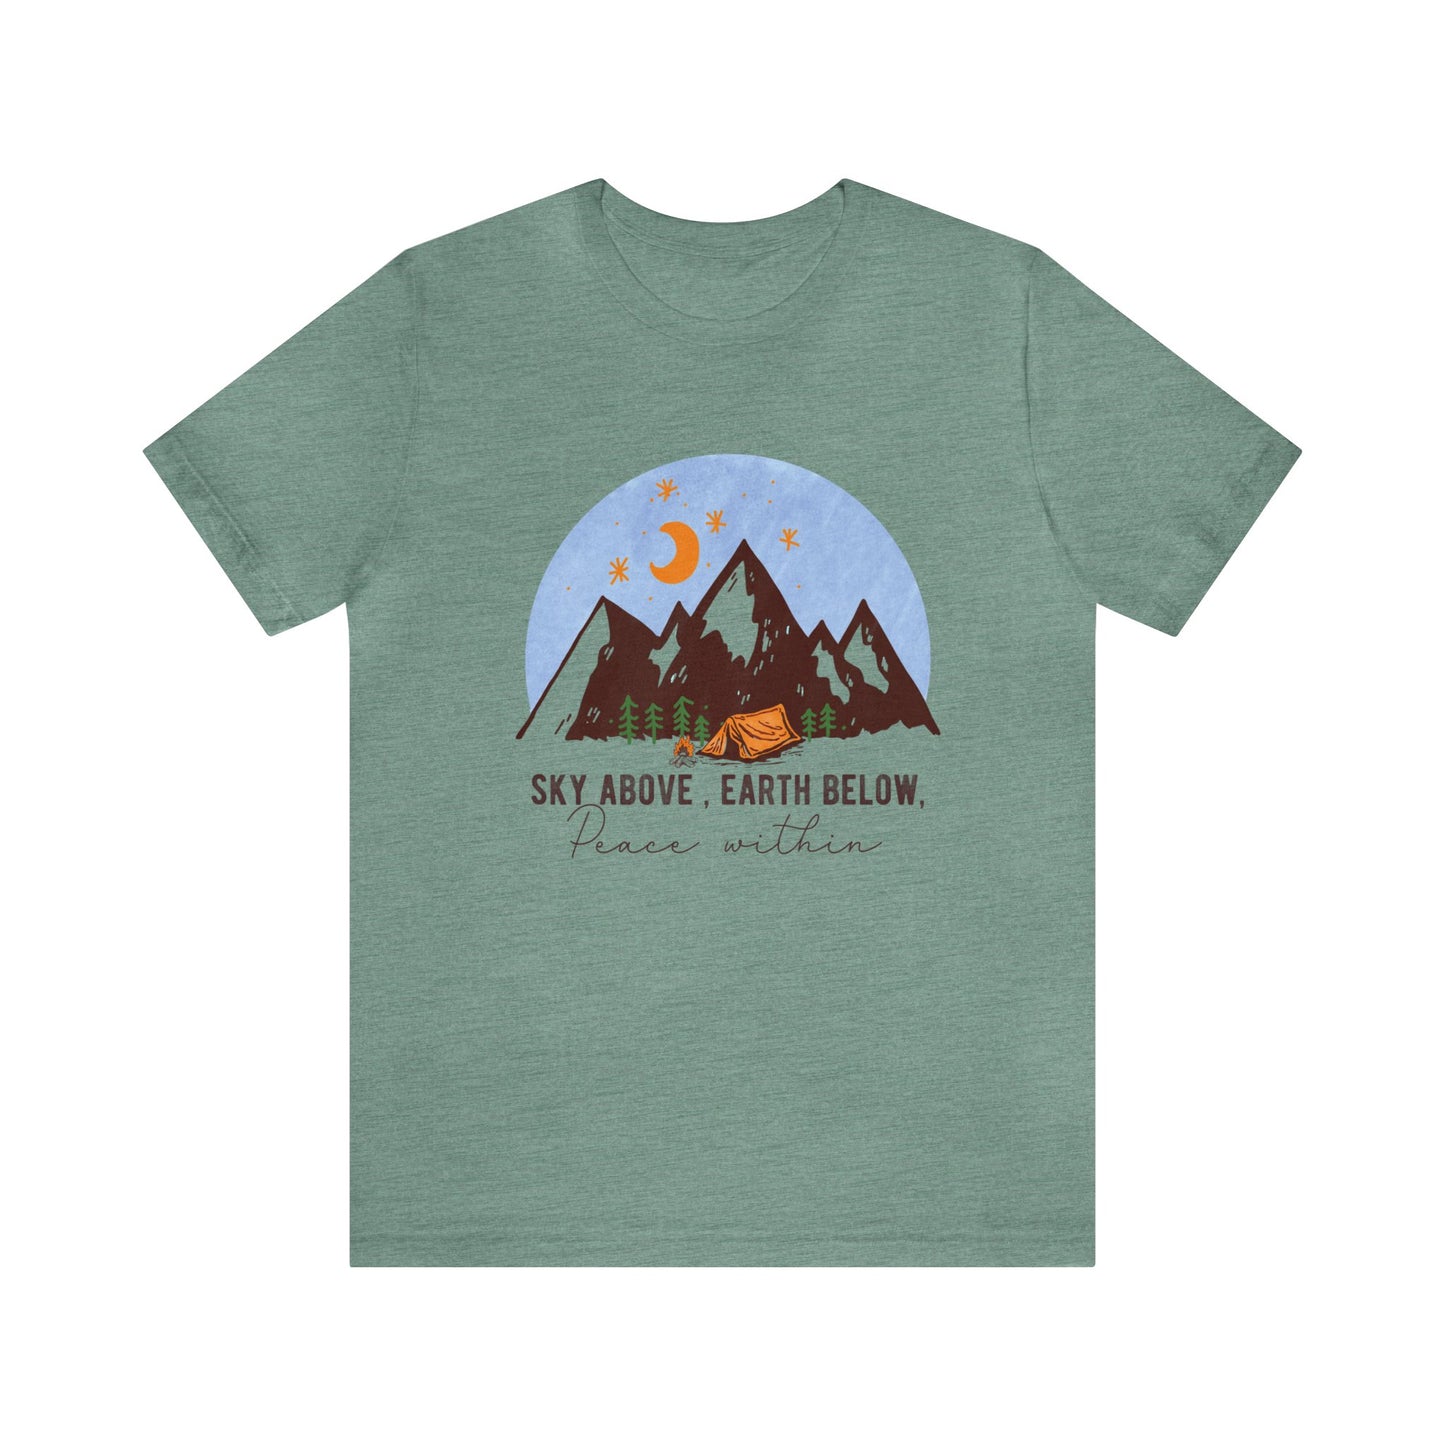 Camping peace within adult unisex Tshirt